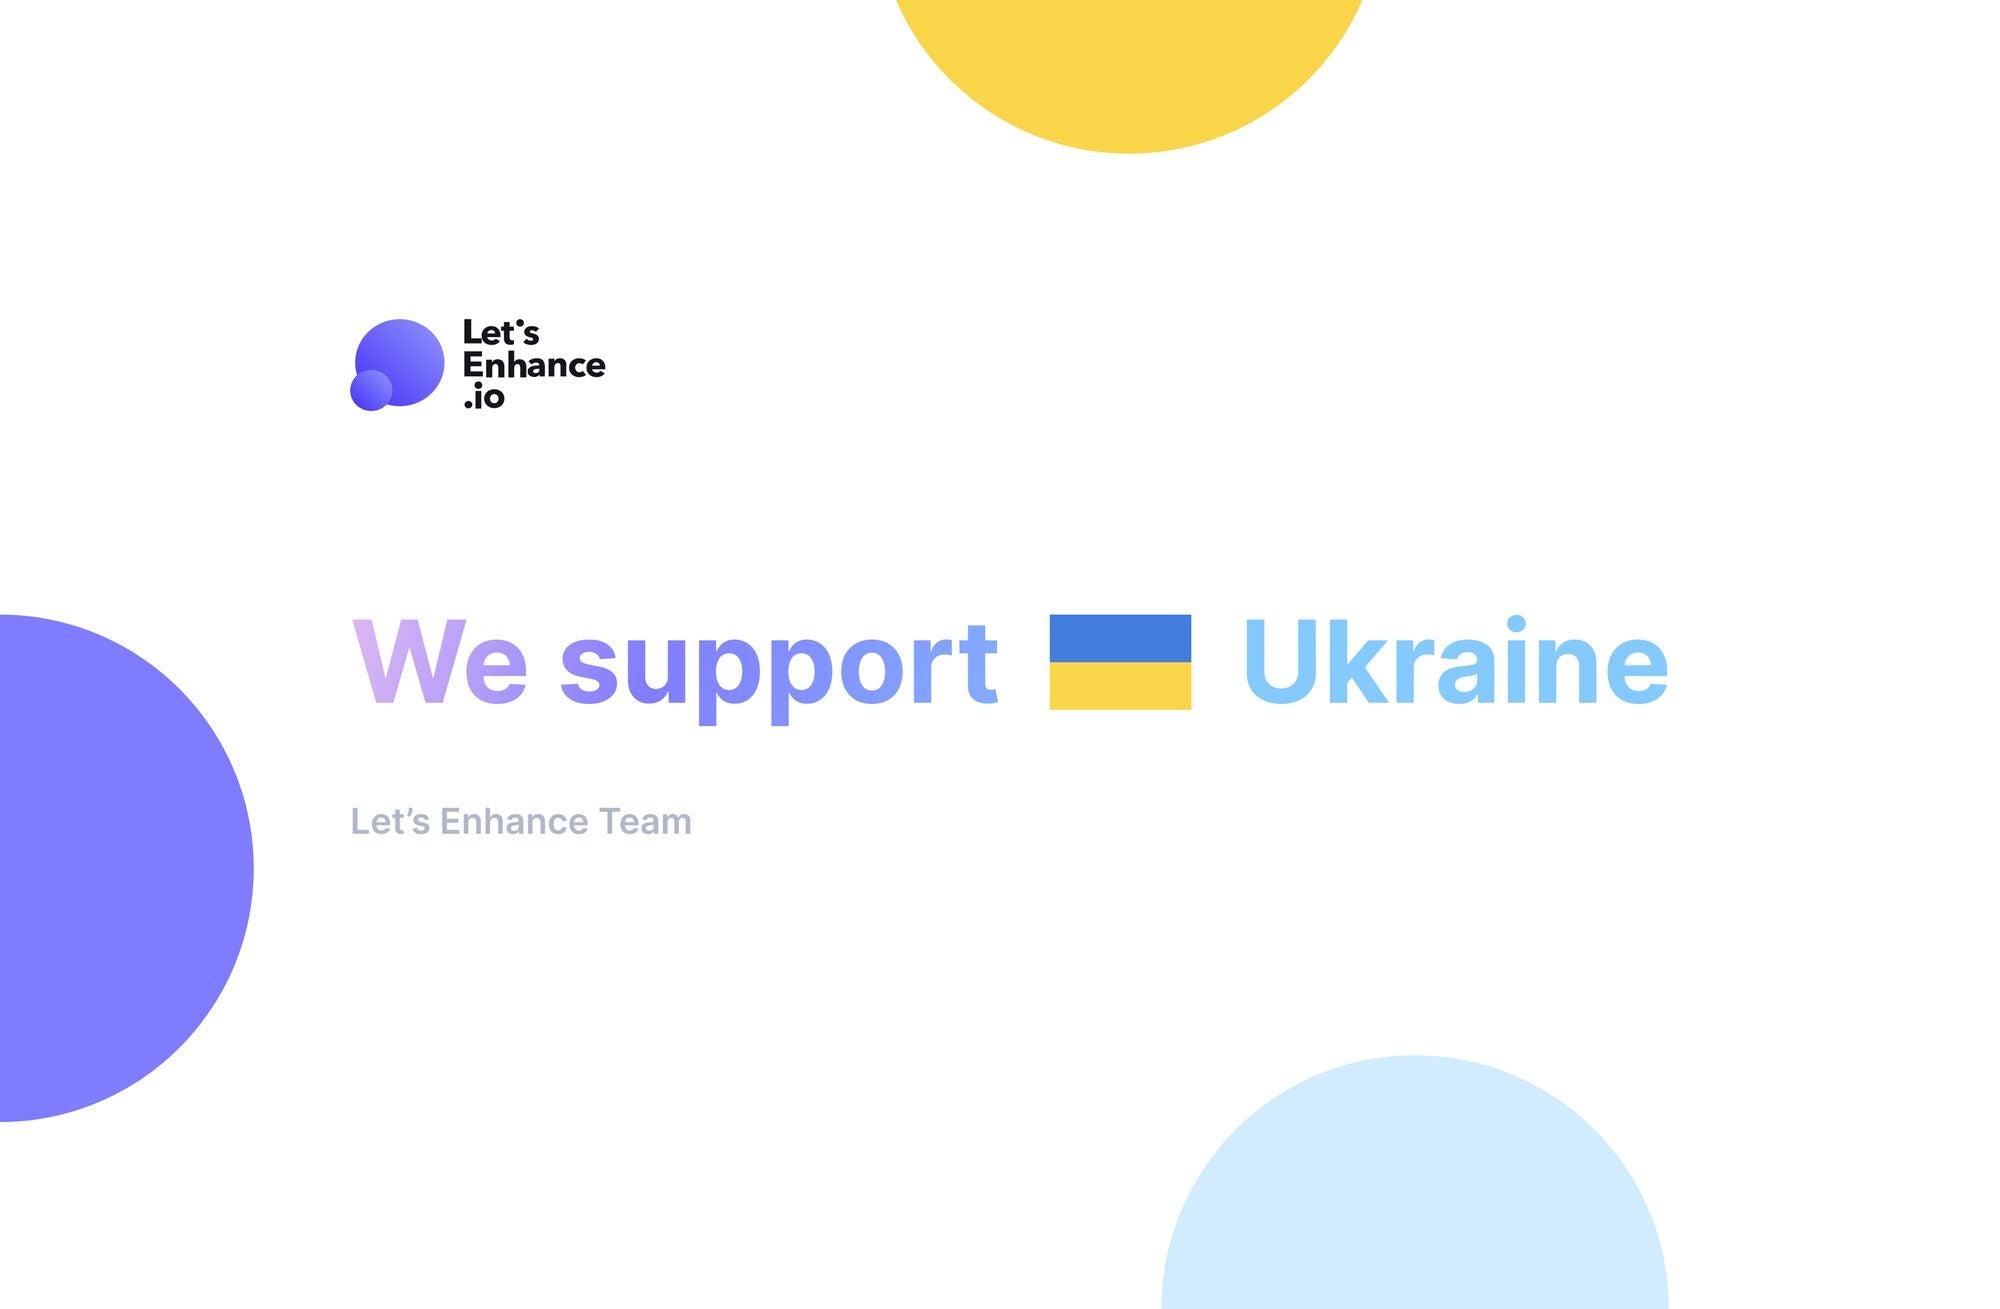 Let’s Enhance stands with Ukraine